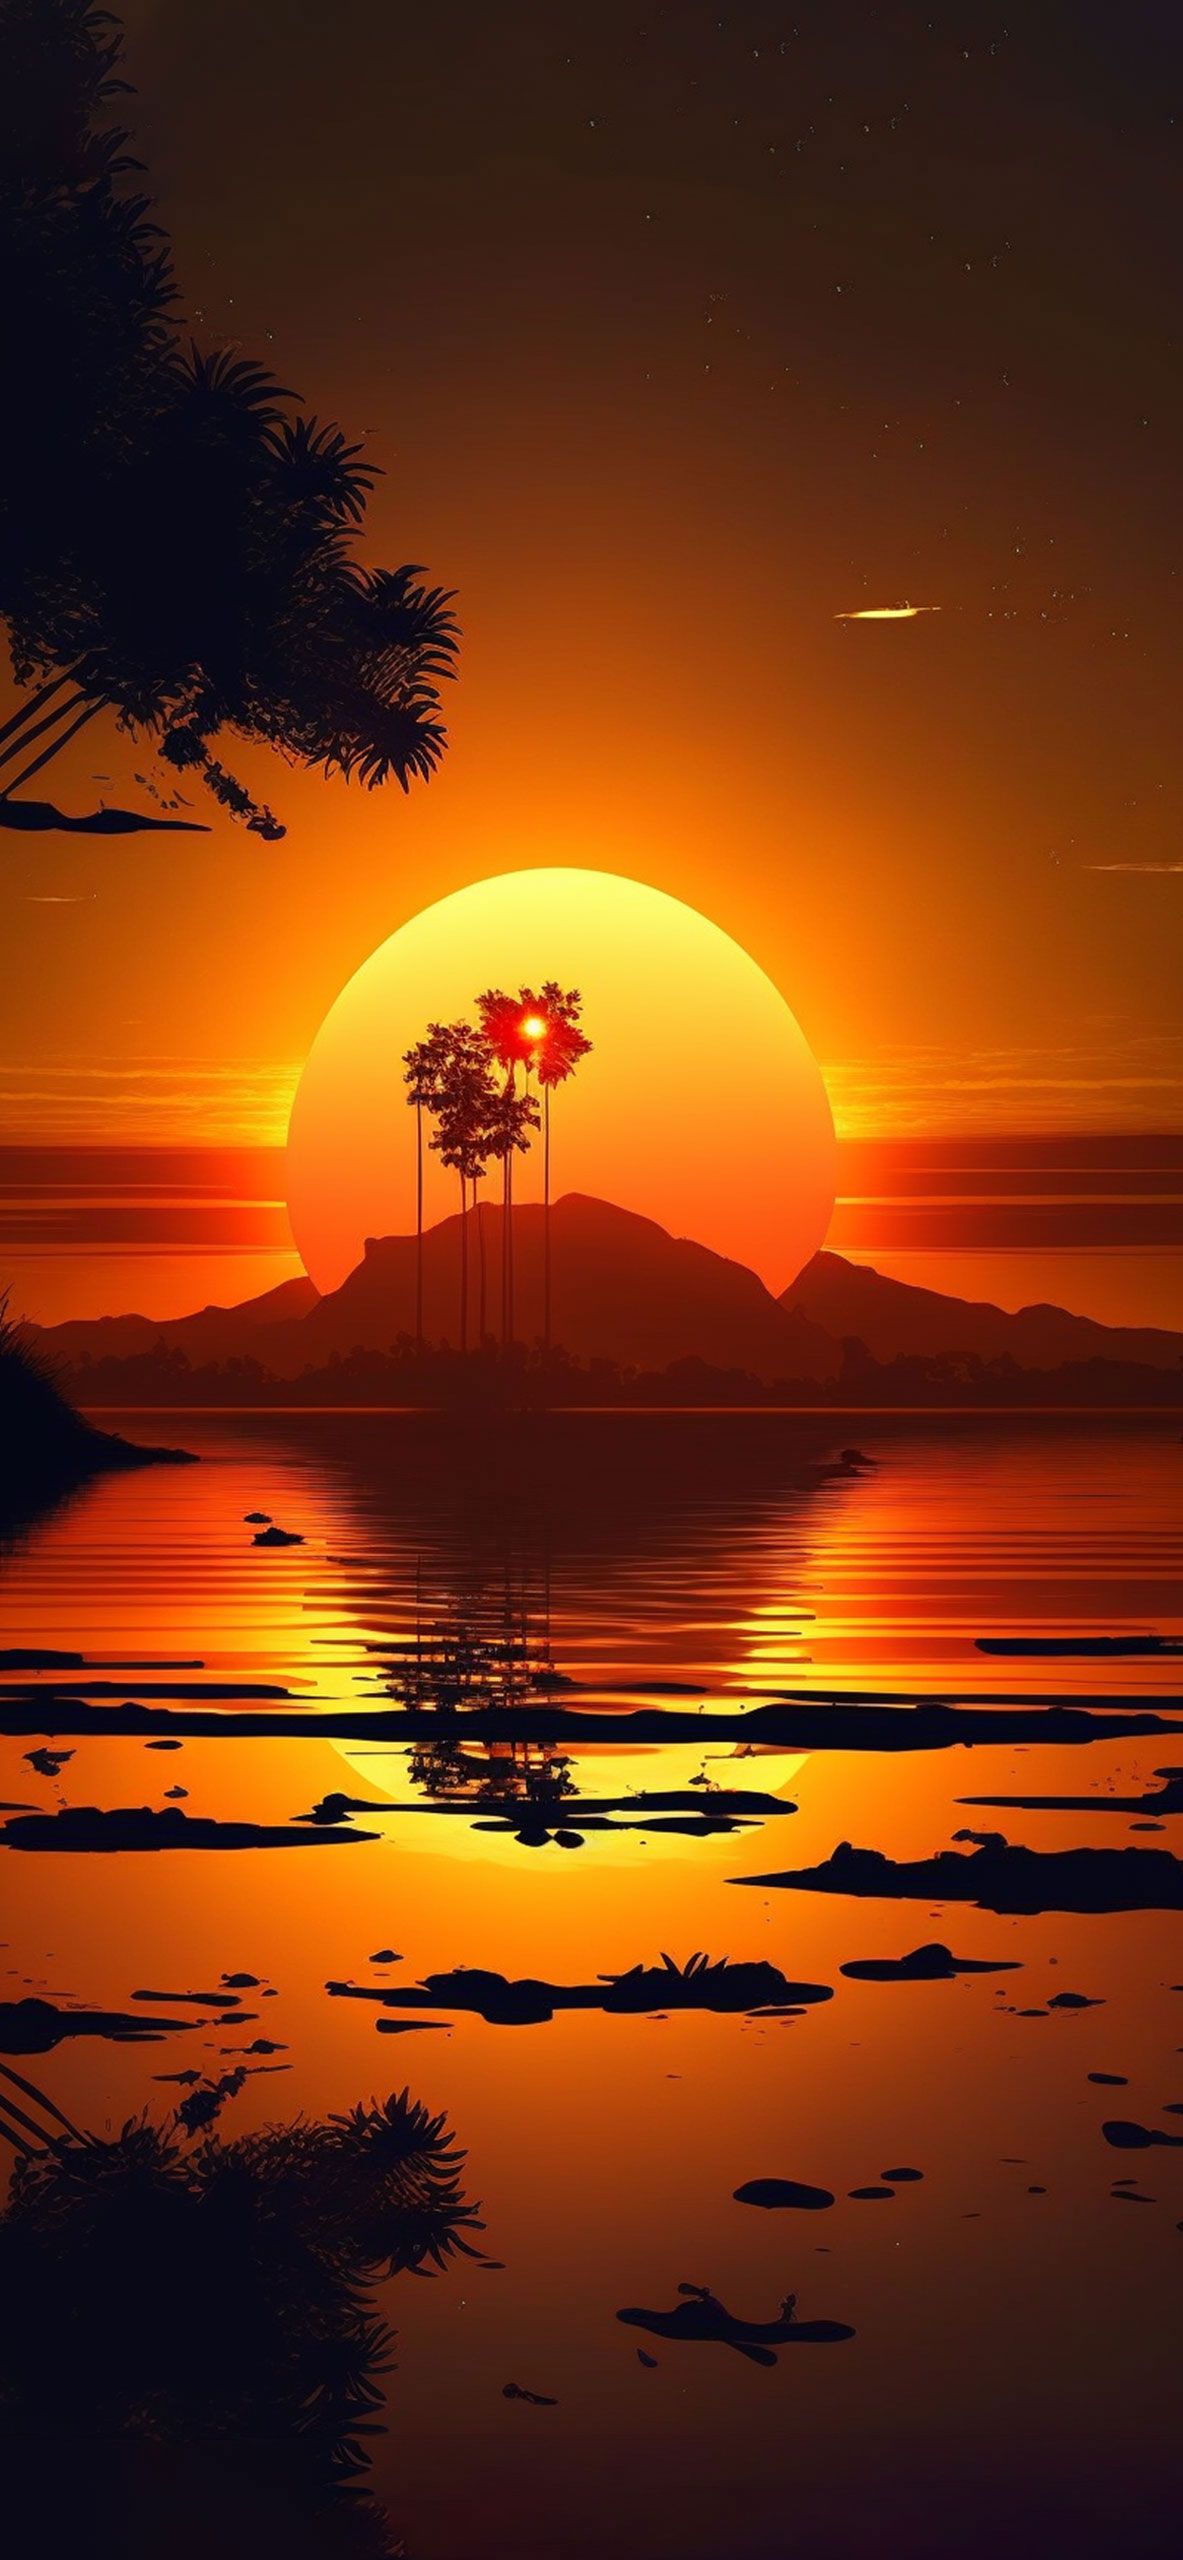 A sunset over the water with trees in it - Sunset, sunrise, sun